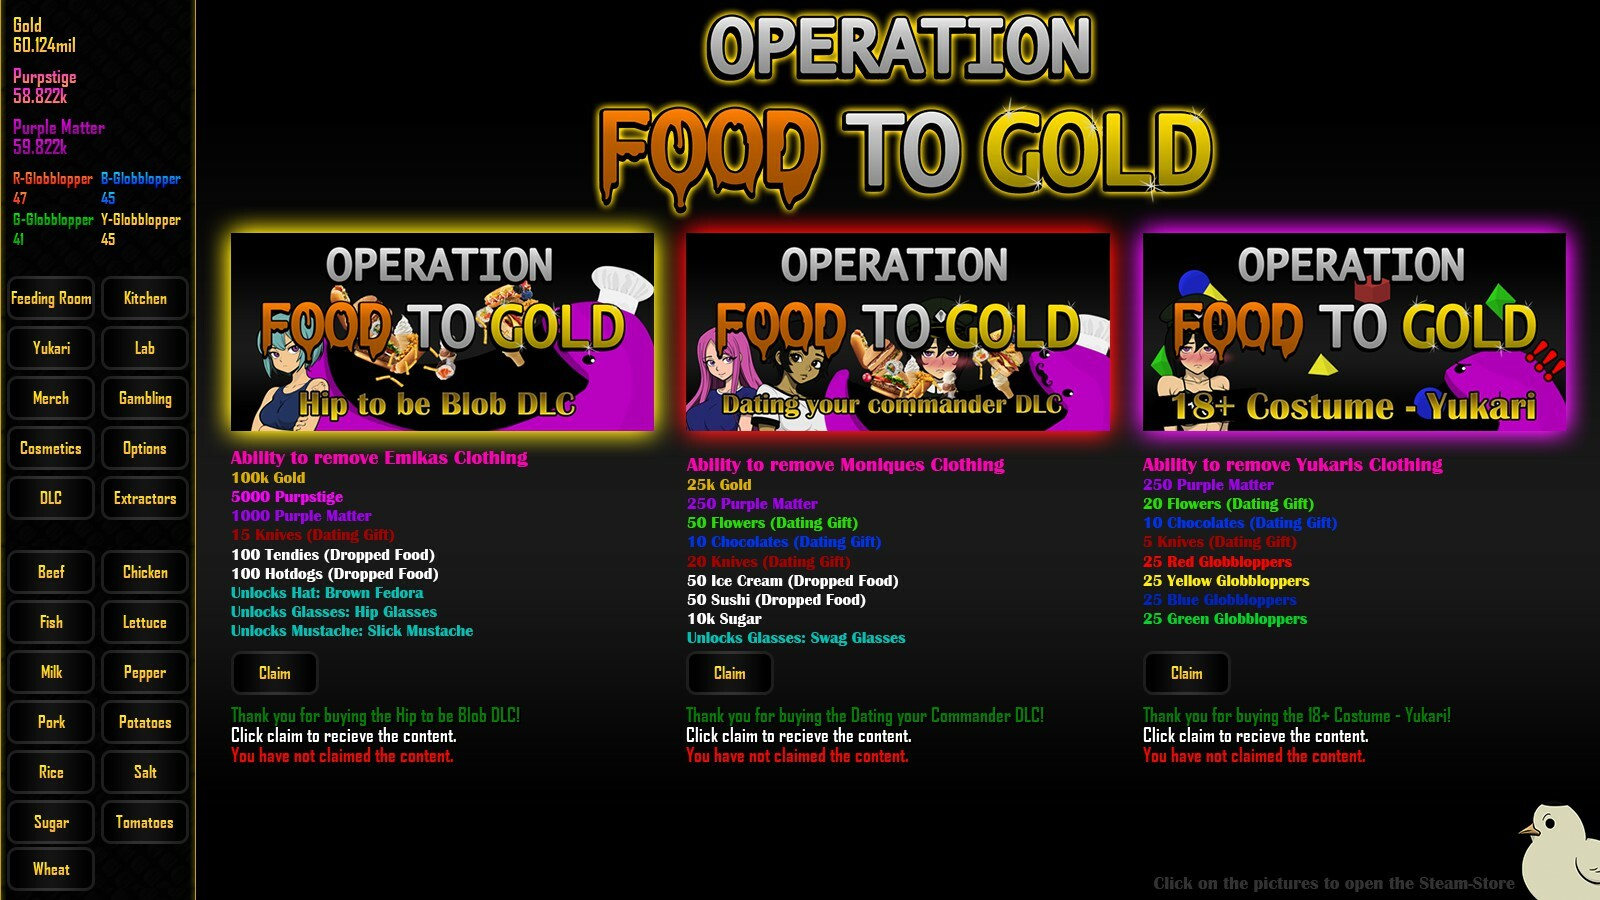 Operation Food to Gold - Dating your commander DLC Featured Screenshot #1